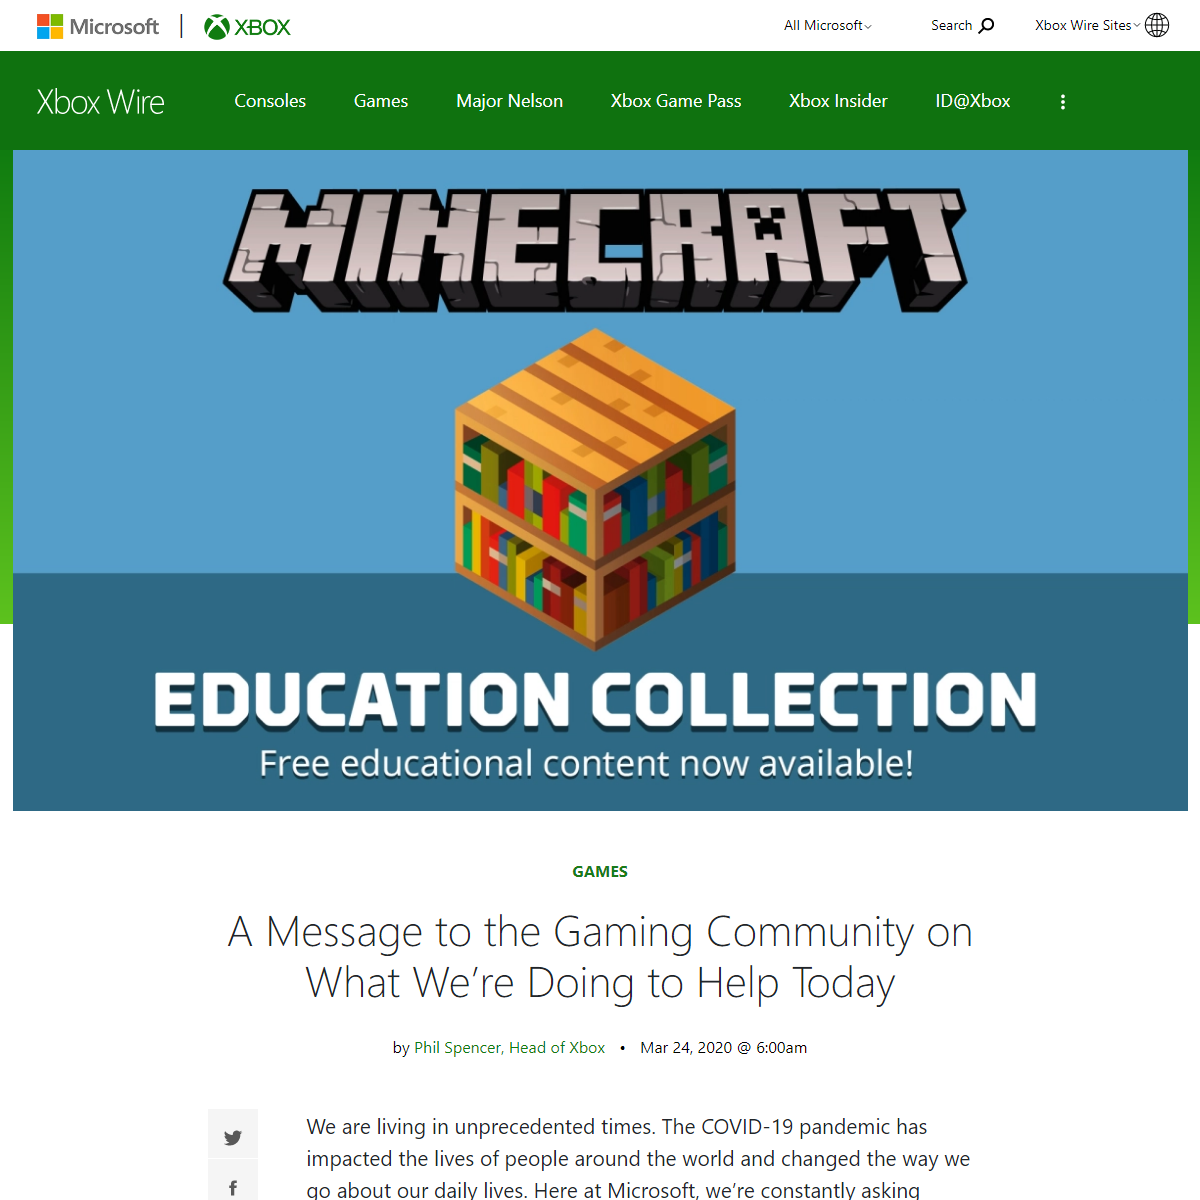 A complete backup of https://news.xbox.com/en-us/2020/03/24/phil-spencer-message-to-community/